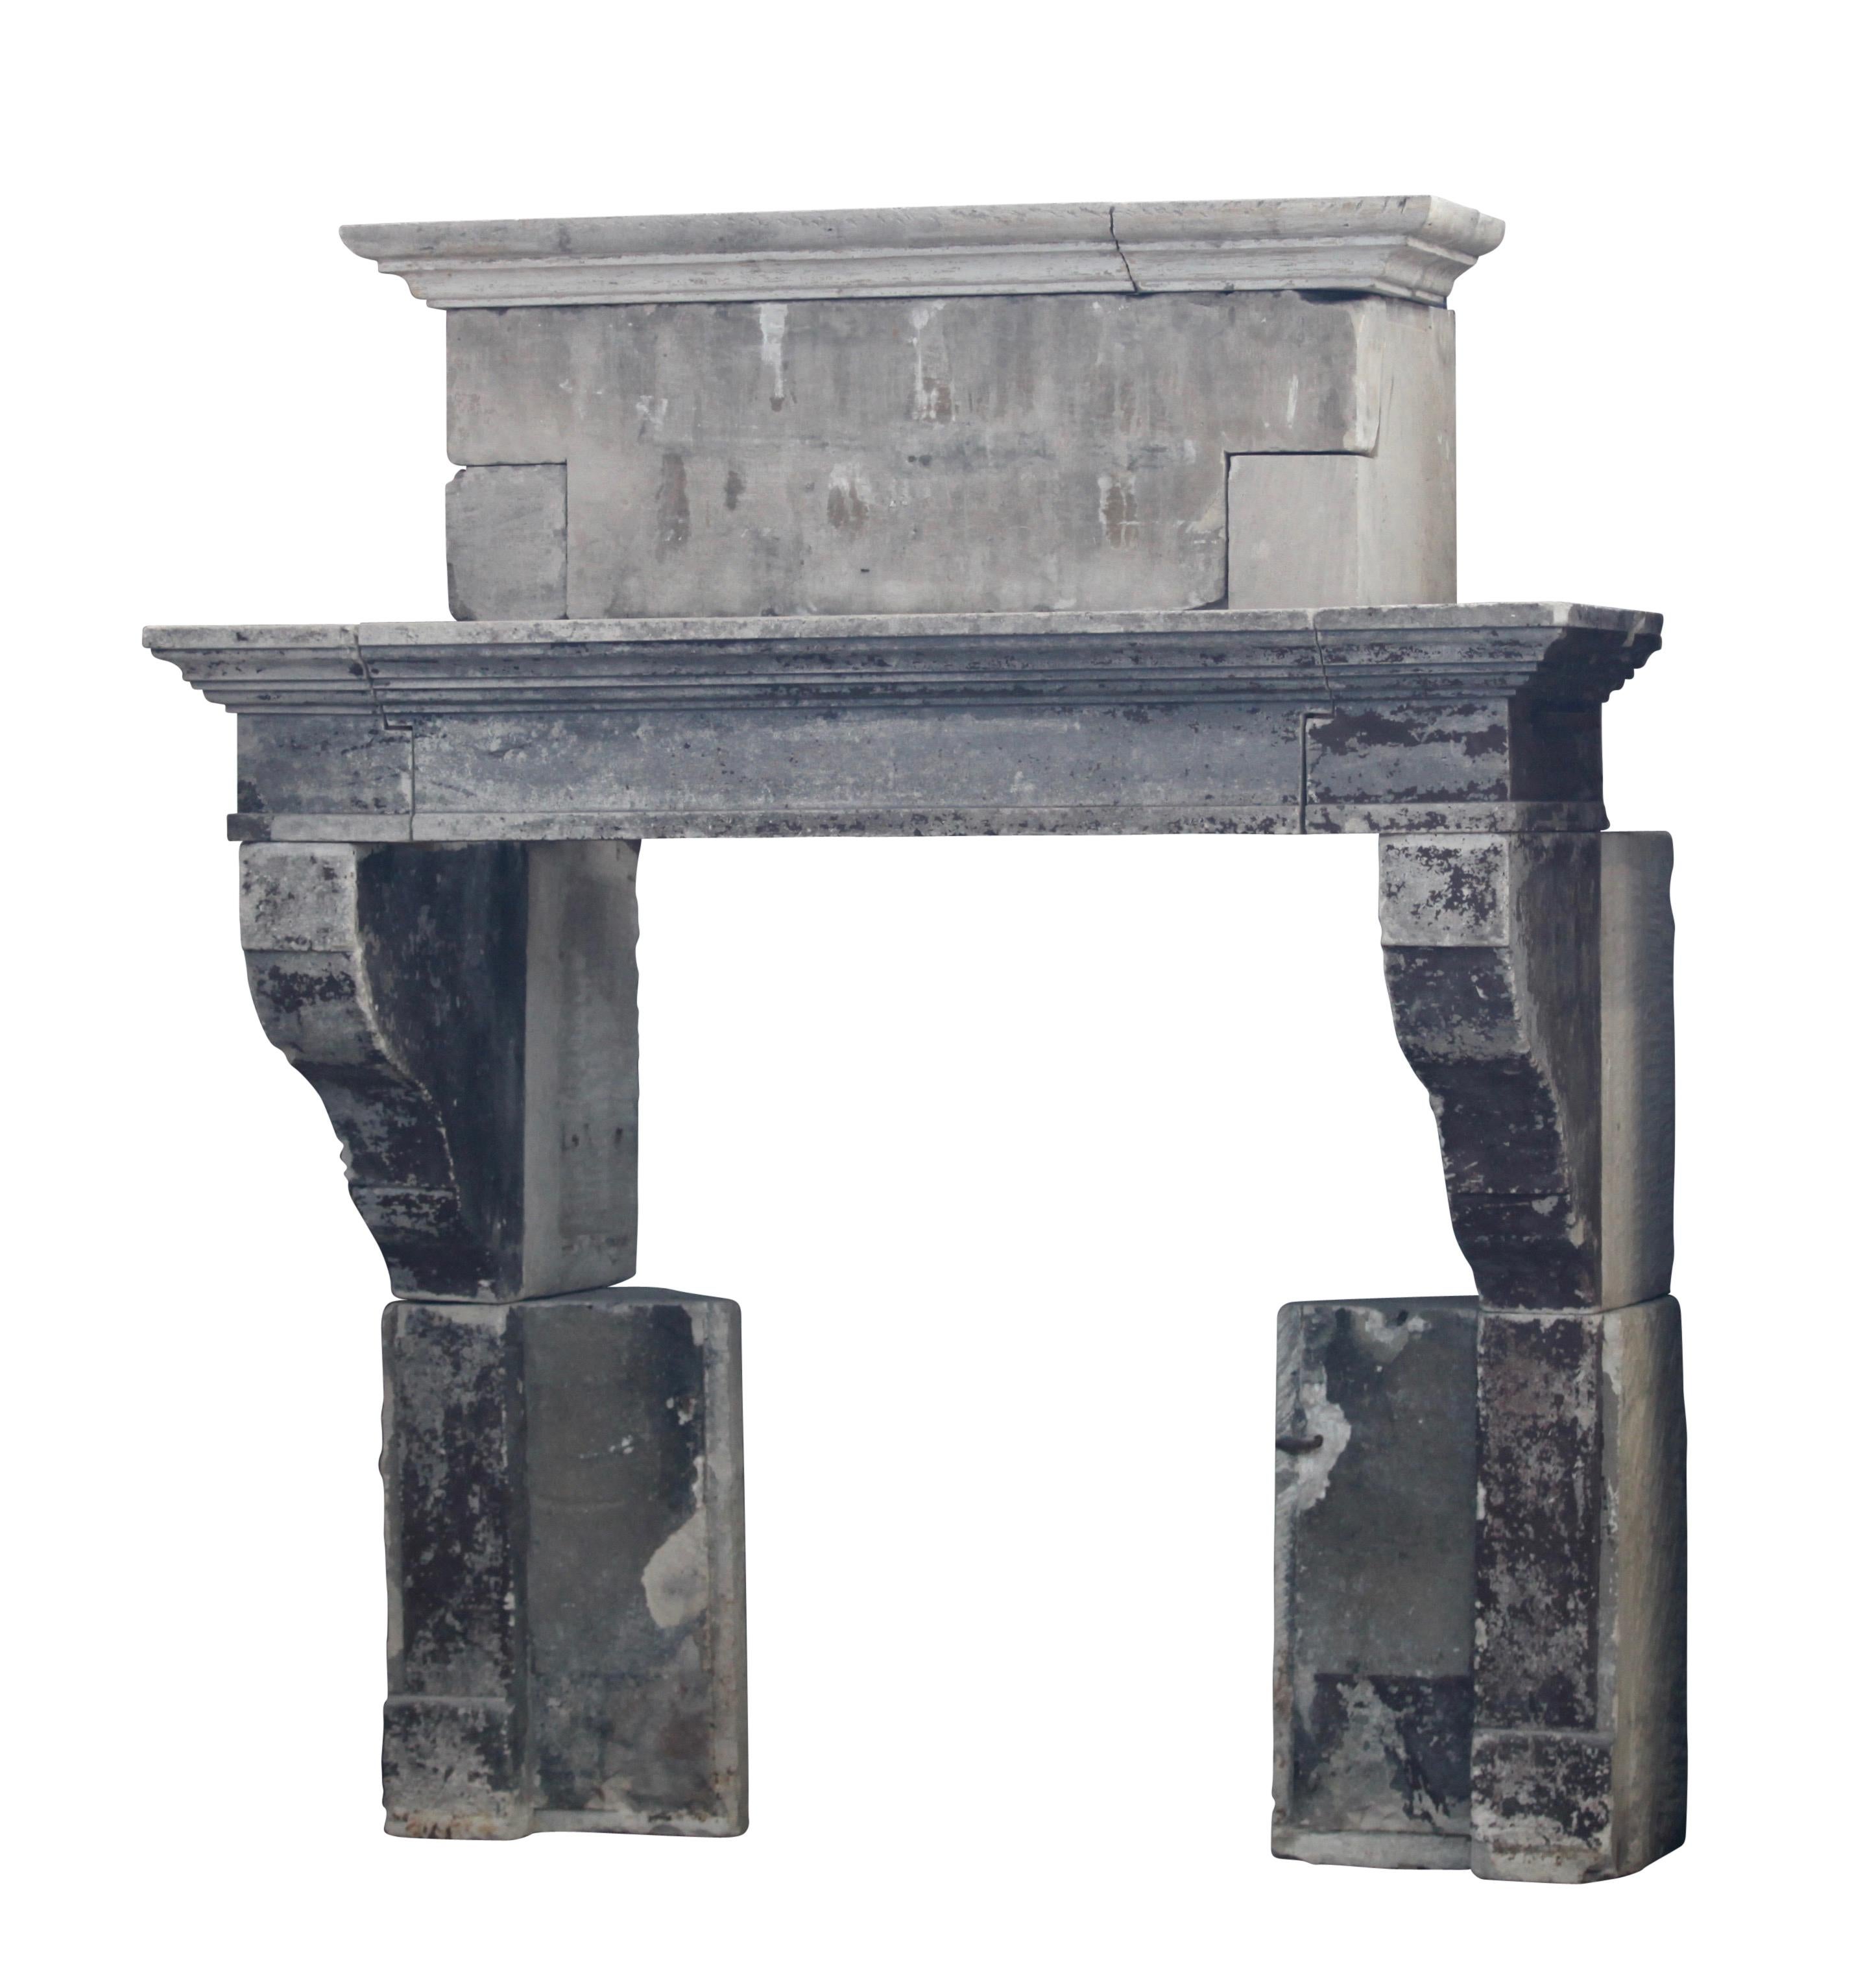 This petite French country fireplace surround in limestone carries still its original patina. It comes out of a castle kitchen. It can be used also in a dining room where the fire is put on table height (above the blocks)
Original and charming